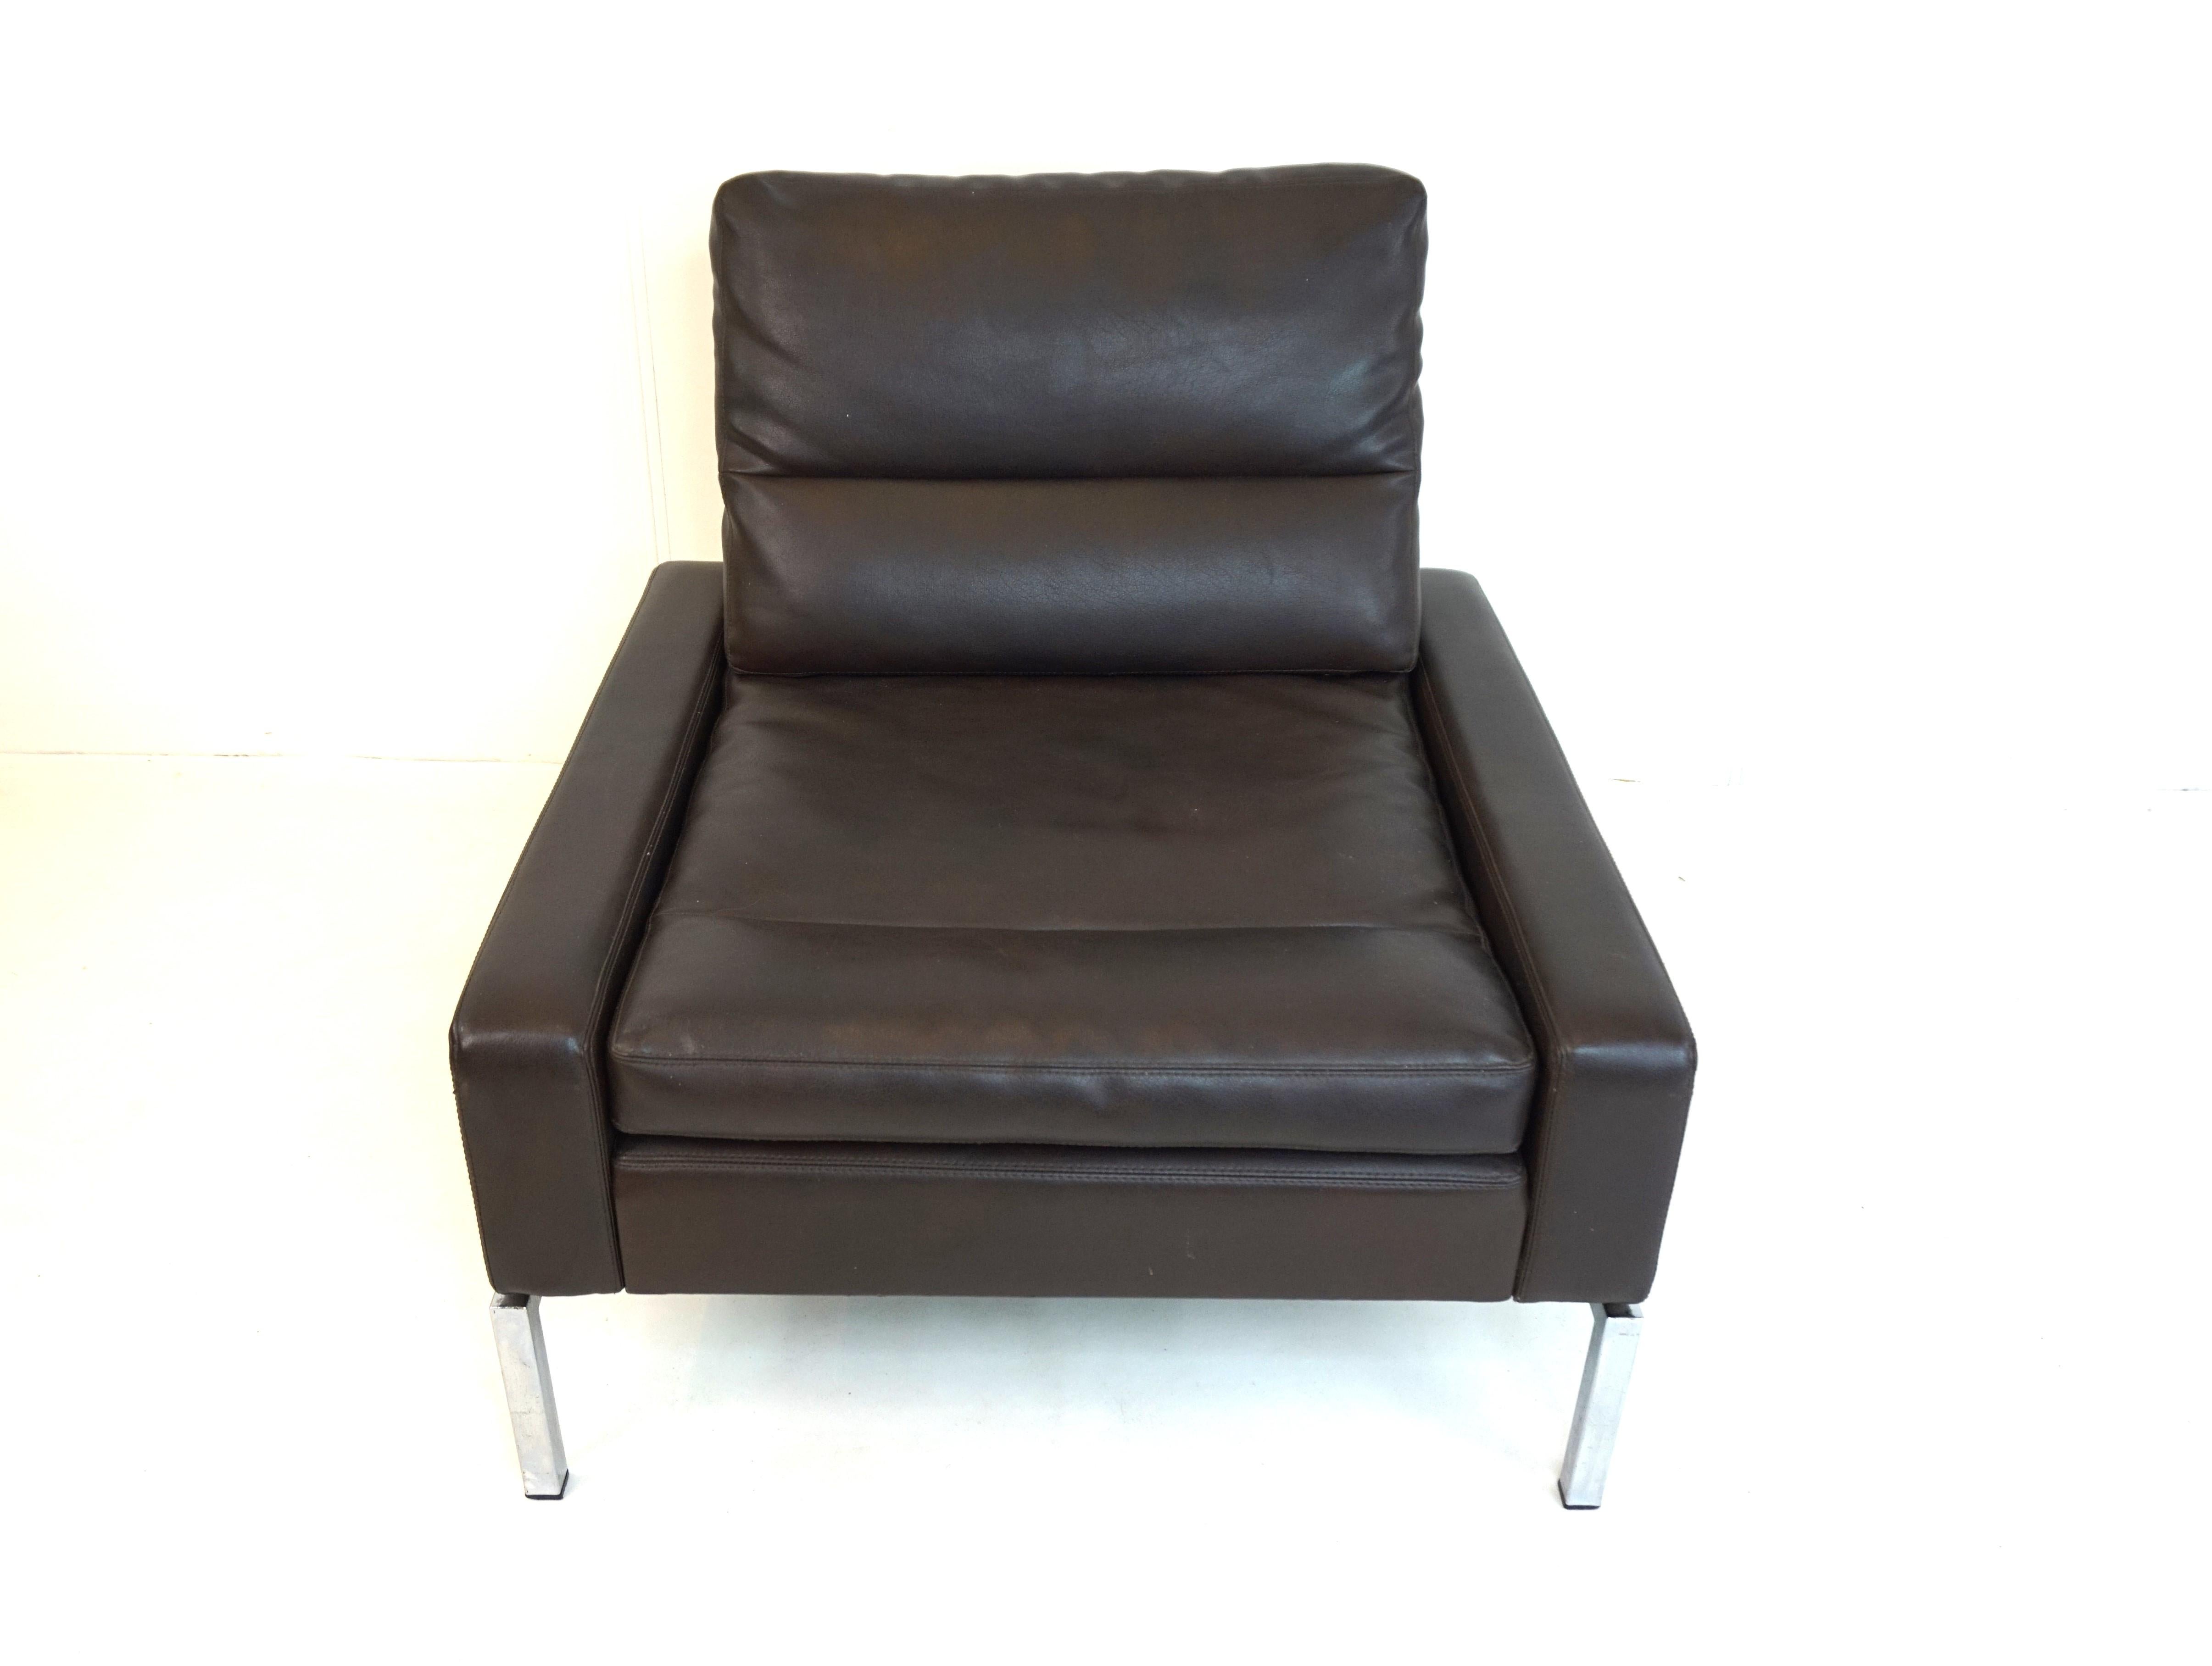 Wilkhahn Series 800 leather armchair by Hans Peter Piel For Sale 3